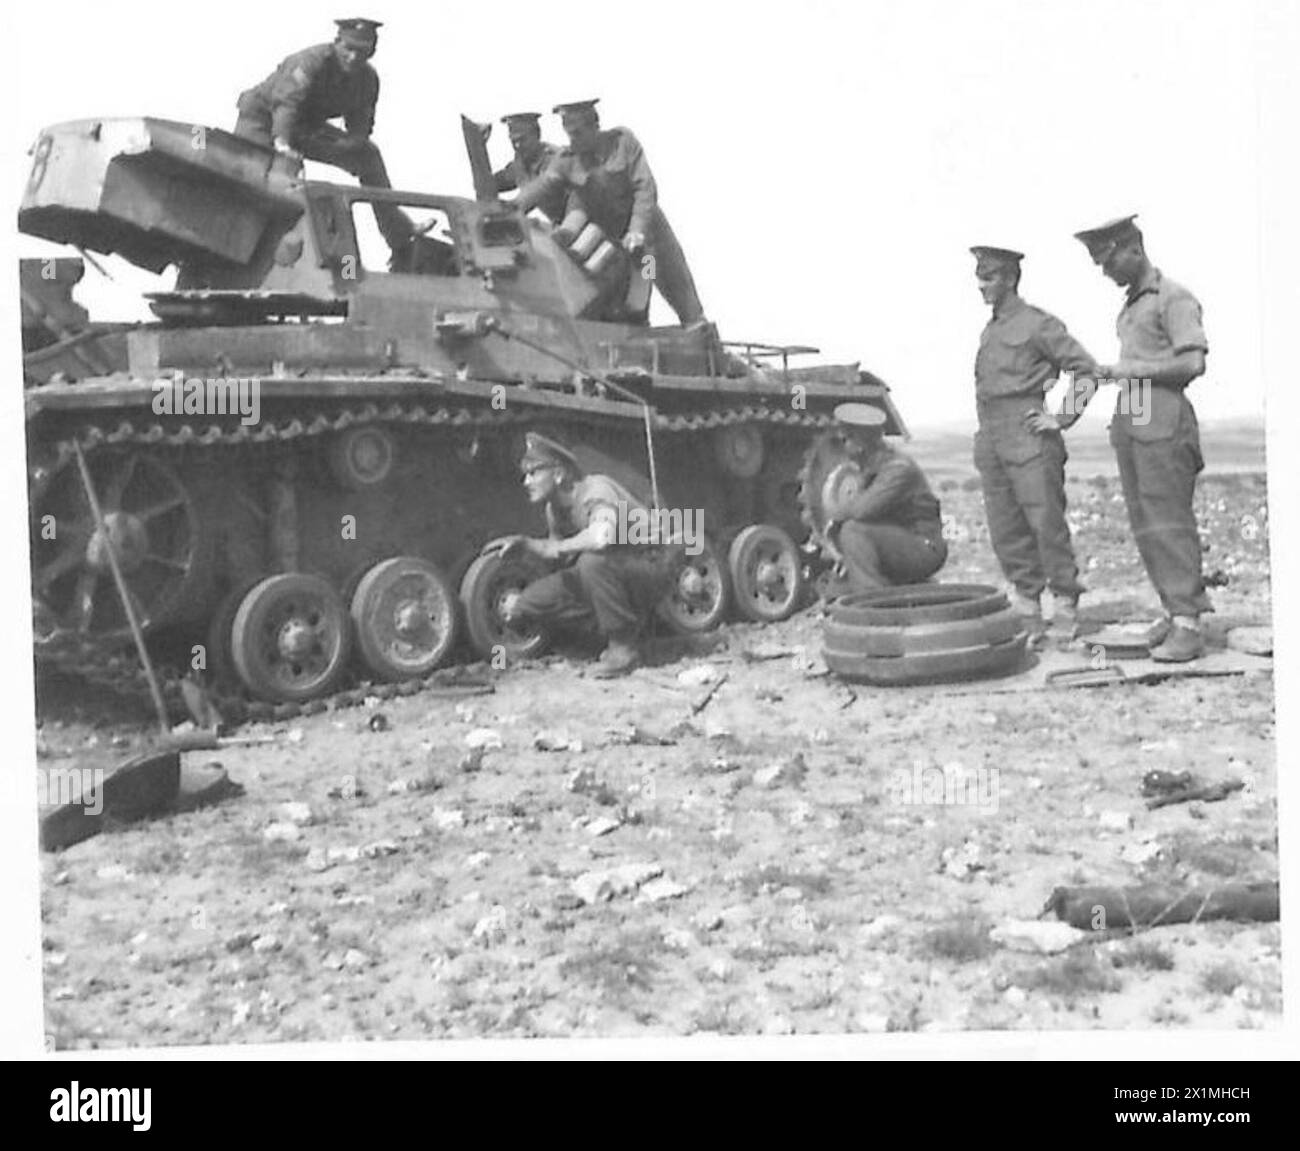 GUARDS SUCCESS AGAINST 15TH PANZER DIVISION IN NORTH AFRICA - Examining one of their hits. On tank are Sgt. G. Stevenson of Grovslot, Margfott, Cumberland, Cdmm.I. Fenwick of Dundee and Cpl. Bunyon of Kelty, Fifeshire, on ground are J.MacDonald of Edinburgh, D. Hindle of Anderton, Lancs. L/Cpl H.K.Little of Ayr and Cpl. A. Campbell, British Army Stock Photo